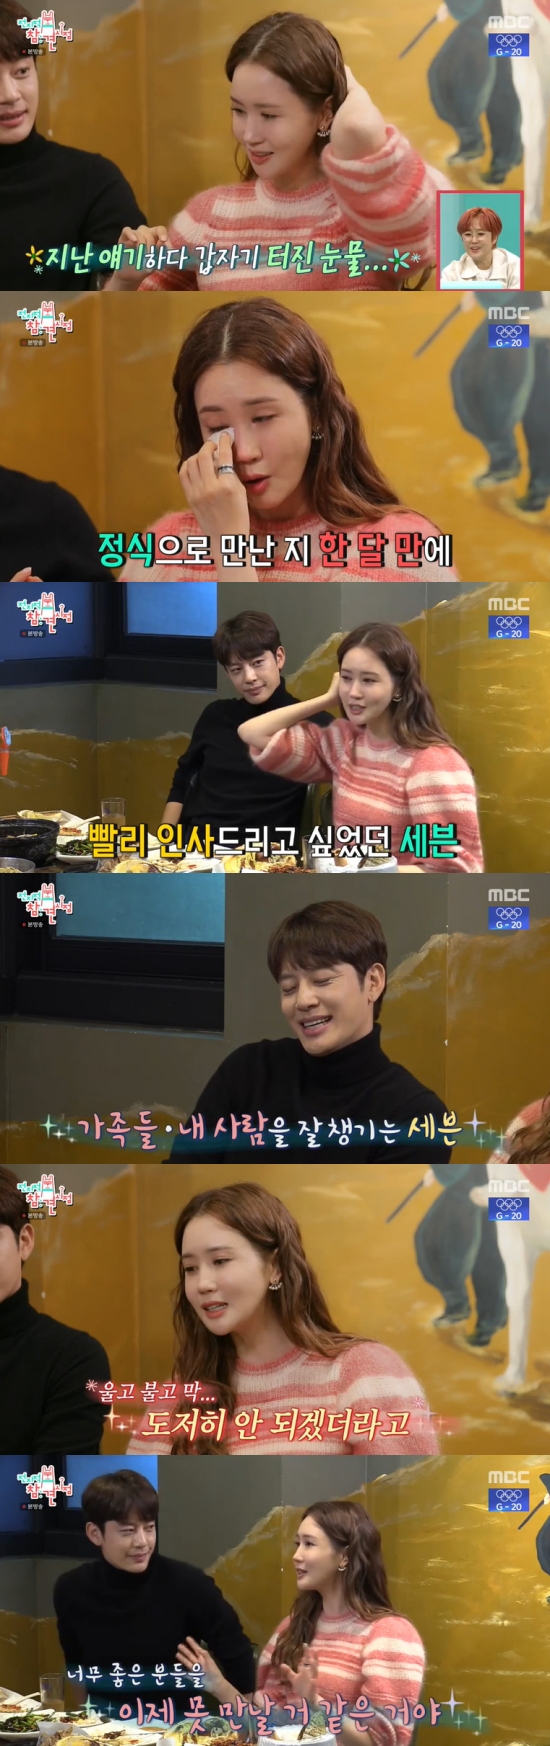 In MBC Point of Omniscient Interfere broadcasted on the 15th, Lee Da-hae and Seven appeared together.Lee Da-hae visited Lee Da-hae Manager and the restaurant on the day.Lee Da-hae invited Seven and Choi Sung-joon to the dinner party, and Lee Da-hae and Seven appeared for the first time on the air.Lee Da-hae said that he was able to get close to Seven because of Choi Sung-joon, who was close friends, and naturally Lee Da-hae and Sevens love story was released.Choi Sung-joon said, Did not you know both for a long time? I have never asked either of them.The present is important, but the past is simple, Lee Da-hae said.Seven was embarrassed, saying, Do not do it, and Lee Da-hae showed off his unsettling gesture, saying, If you start dating once, you will do it long.Seven said, Dahae was born and said it was the longest love. It was the longest for two or three years, and I said, This is the shortest thing.Choi Sung-joon also said, I was proud of this place, but did not there be a big event in A Year Ago in Winter? Lee Da-hae and Seven said that they had a crisis of separation.Lee Da-hae said: There was something like that: after a long time we met, my friends, my sisters and my brothers became so pretty, there were too many people crying (when they almost broke up).I can not have this. Even my aunt cried. My mother was so sorry that my neighbors cried and especially I was most sorry. Lee Da-hae said, My mother was not pretty from the beginning. She is my mother. I have suffered a little trouble. I like it.Lee Da-hae said, But a month after I met, (Seven) kept saying, I miss my mother, and my mother said, Lets meet in a little while.(Seven) said he wanted to actively go out and buy a gift for Mothers Day. Lee Da-hae said, I was angry to see my mother once, and my mother was getting older and she did a little treatment, so she said she was not seeing it.I told the story (to Seven): I thought we could meet with sunglasses, he added.Lee Da-hae said: My mom gave up and came home and I bought fruit full of both hands. My mom cooked me food.I just ate brightly, The food is so delicious. Then she said, What is it about paper? And she said, What is it?I think I have a son-like mind. Choi Sung-joon praised Dong-wook as a really cool person and a family love even if you look at it for your family. Lee Da-hae said, I think there is a driving force for this person to go long.I am not a large family, but this is a very large family. Lee Da-hae said: I met (Seven) families and theyre so good, my sisters are so good, but my parents are the best.Even when we were in trouble, we were so sorry for our family that we could not cry and cry. I did not think I could meet too good people.I think I can meet this man. Photo = MBC Broadcasting Screen